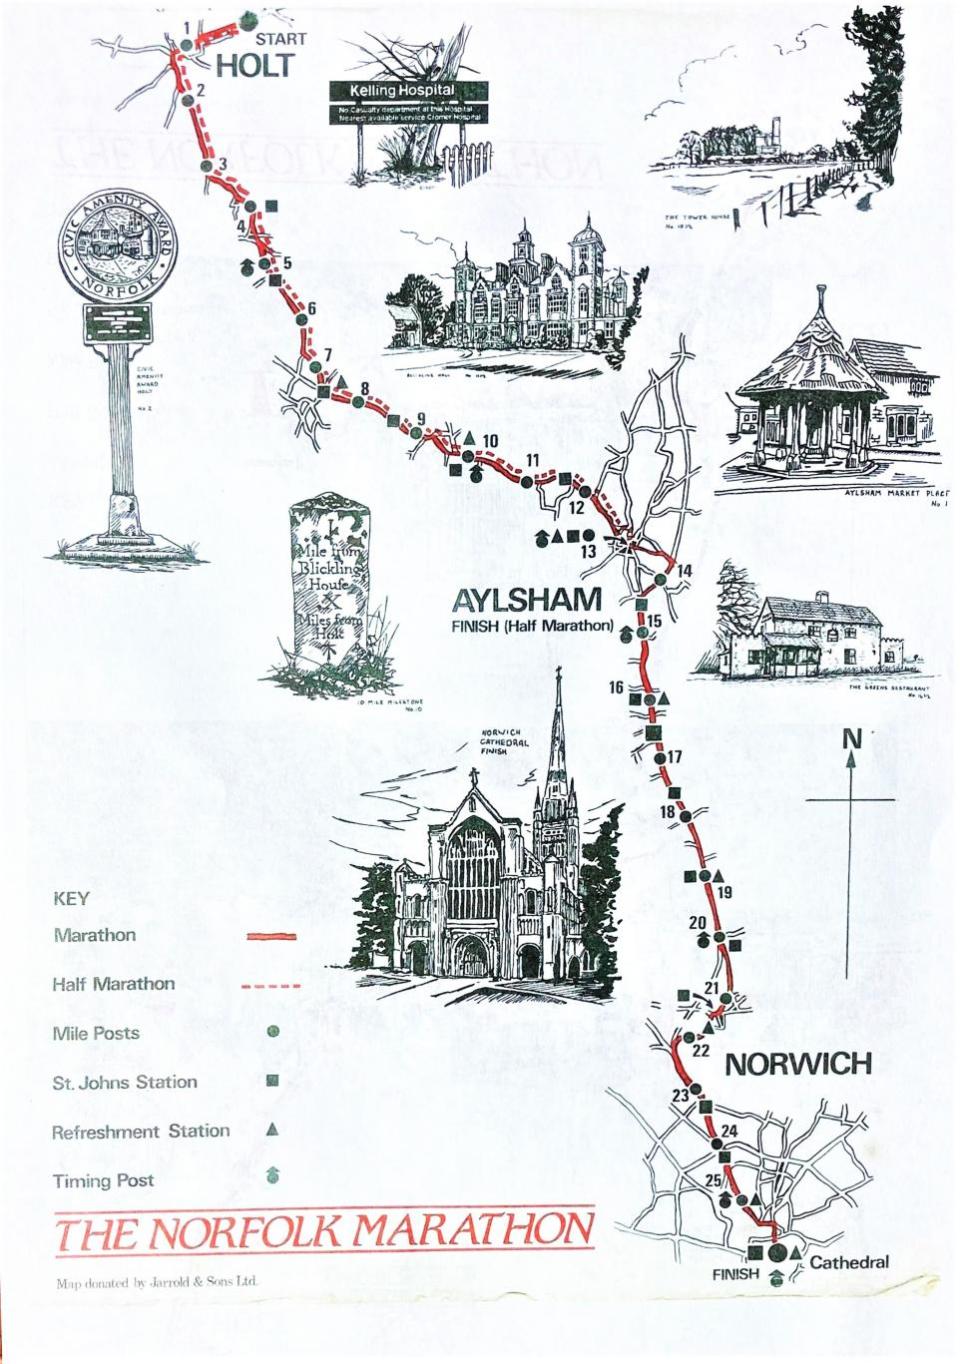 Eastern Daily Press: The route map of the very first Norfolk Marathon in 1982 when it started in Kelling and finished at